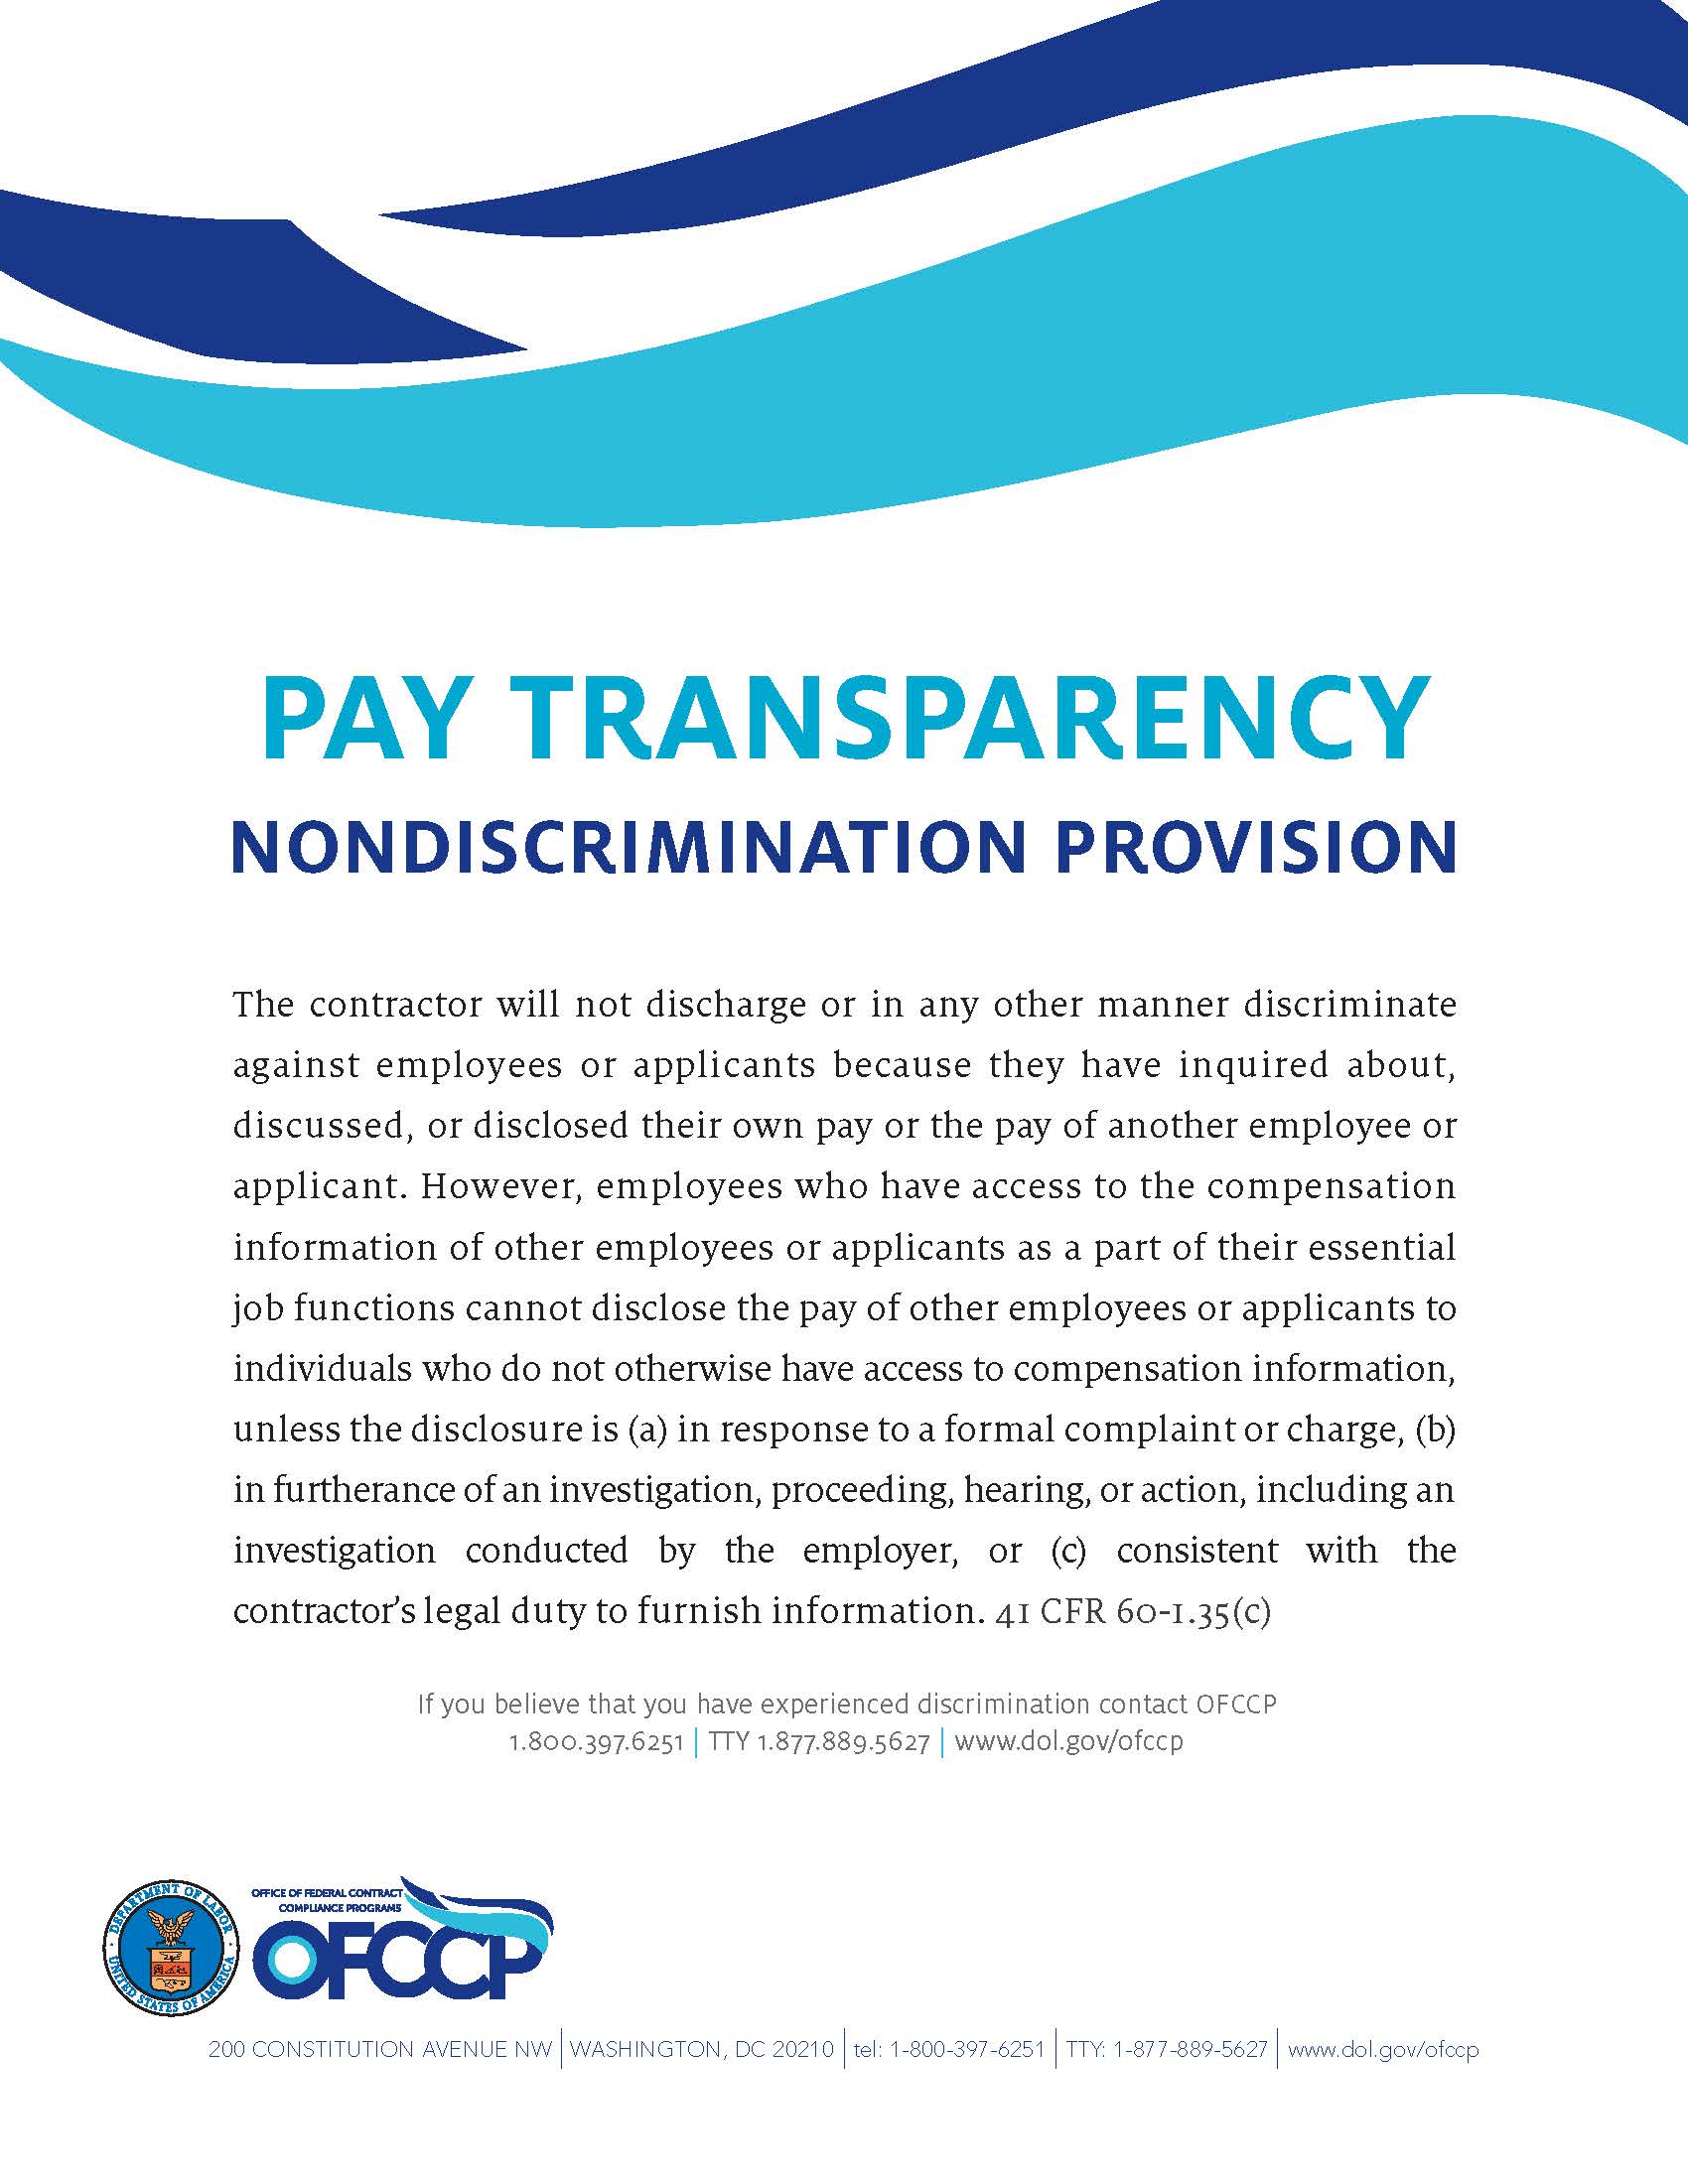 Pay Transparency Statement